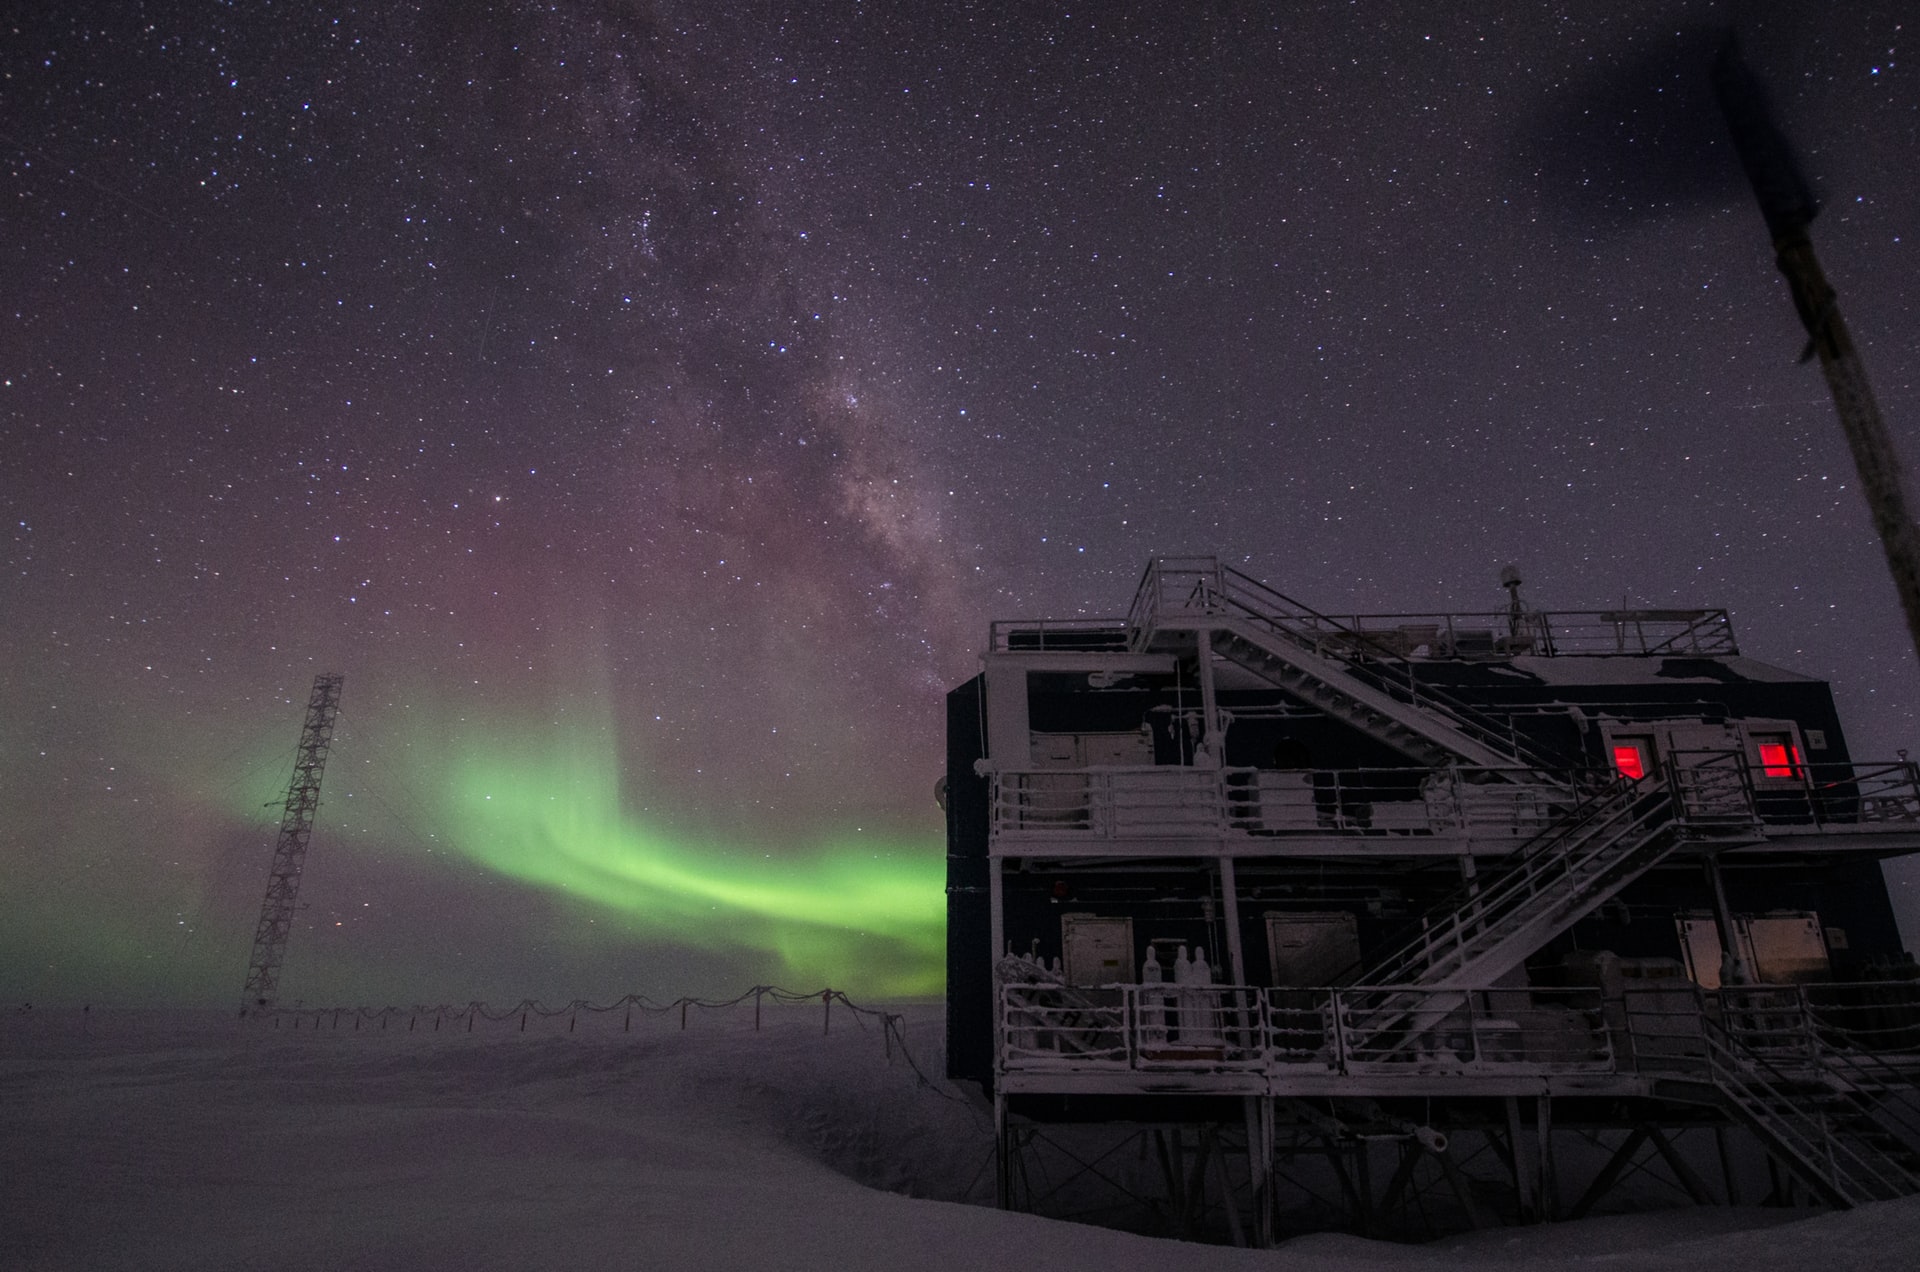 Photo of Aurora australis and Milky Way seen over NOAA Atmospheric Research Observatory by NOAA on Unsplash